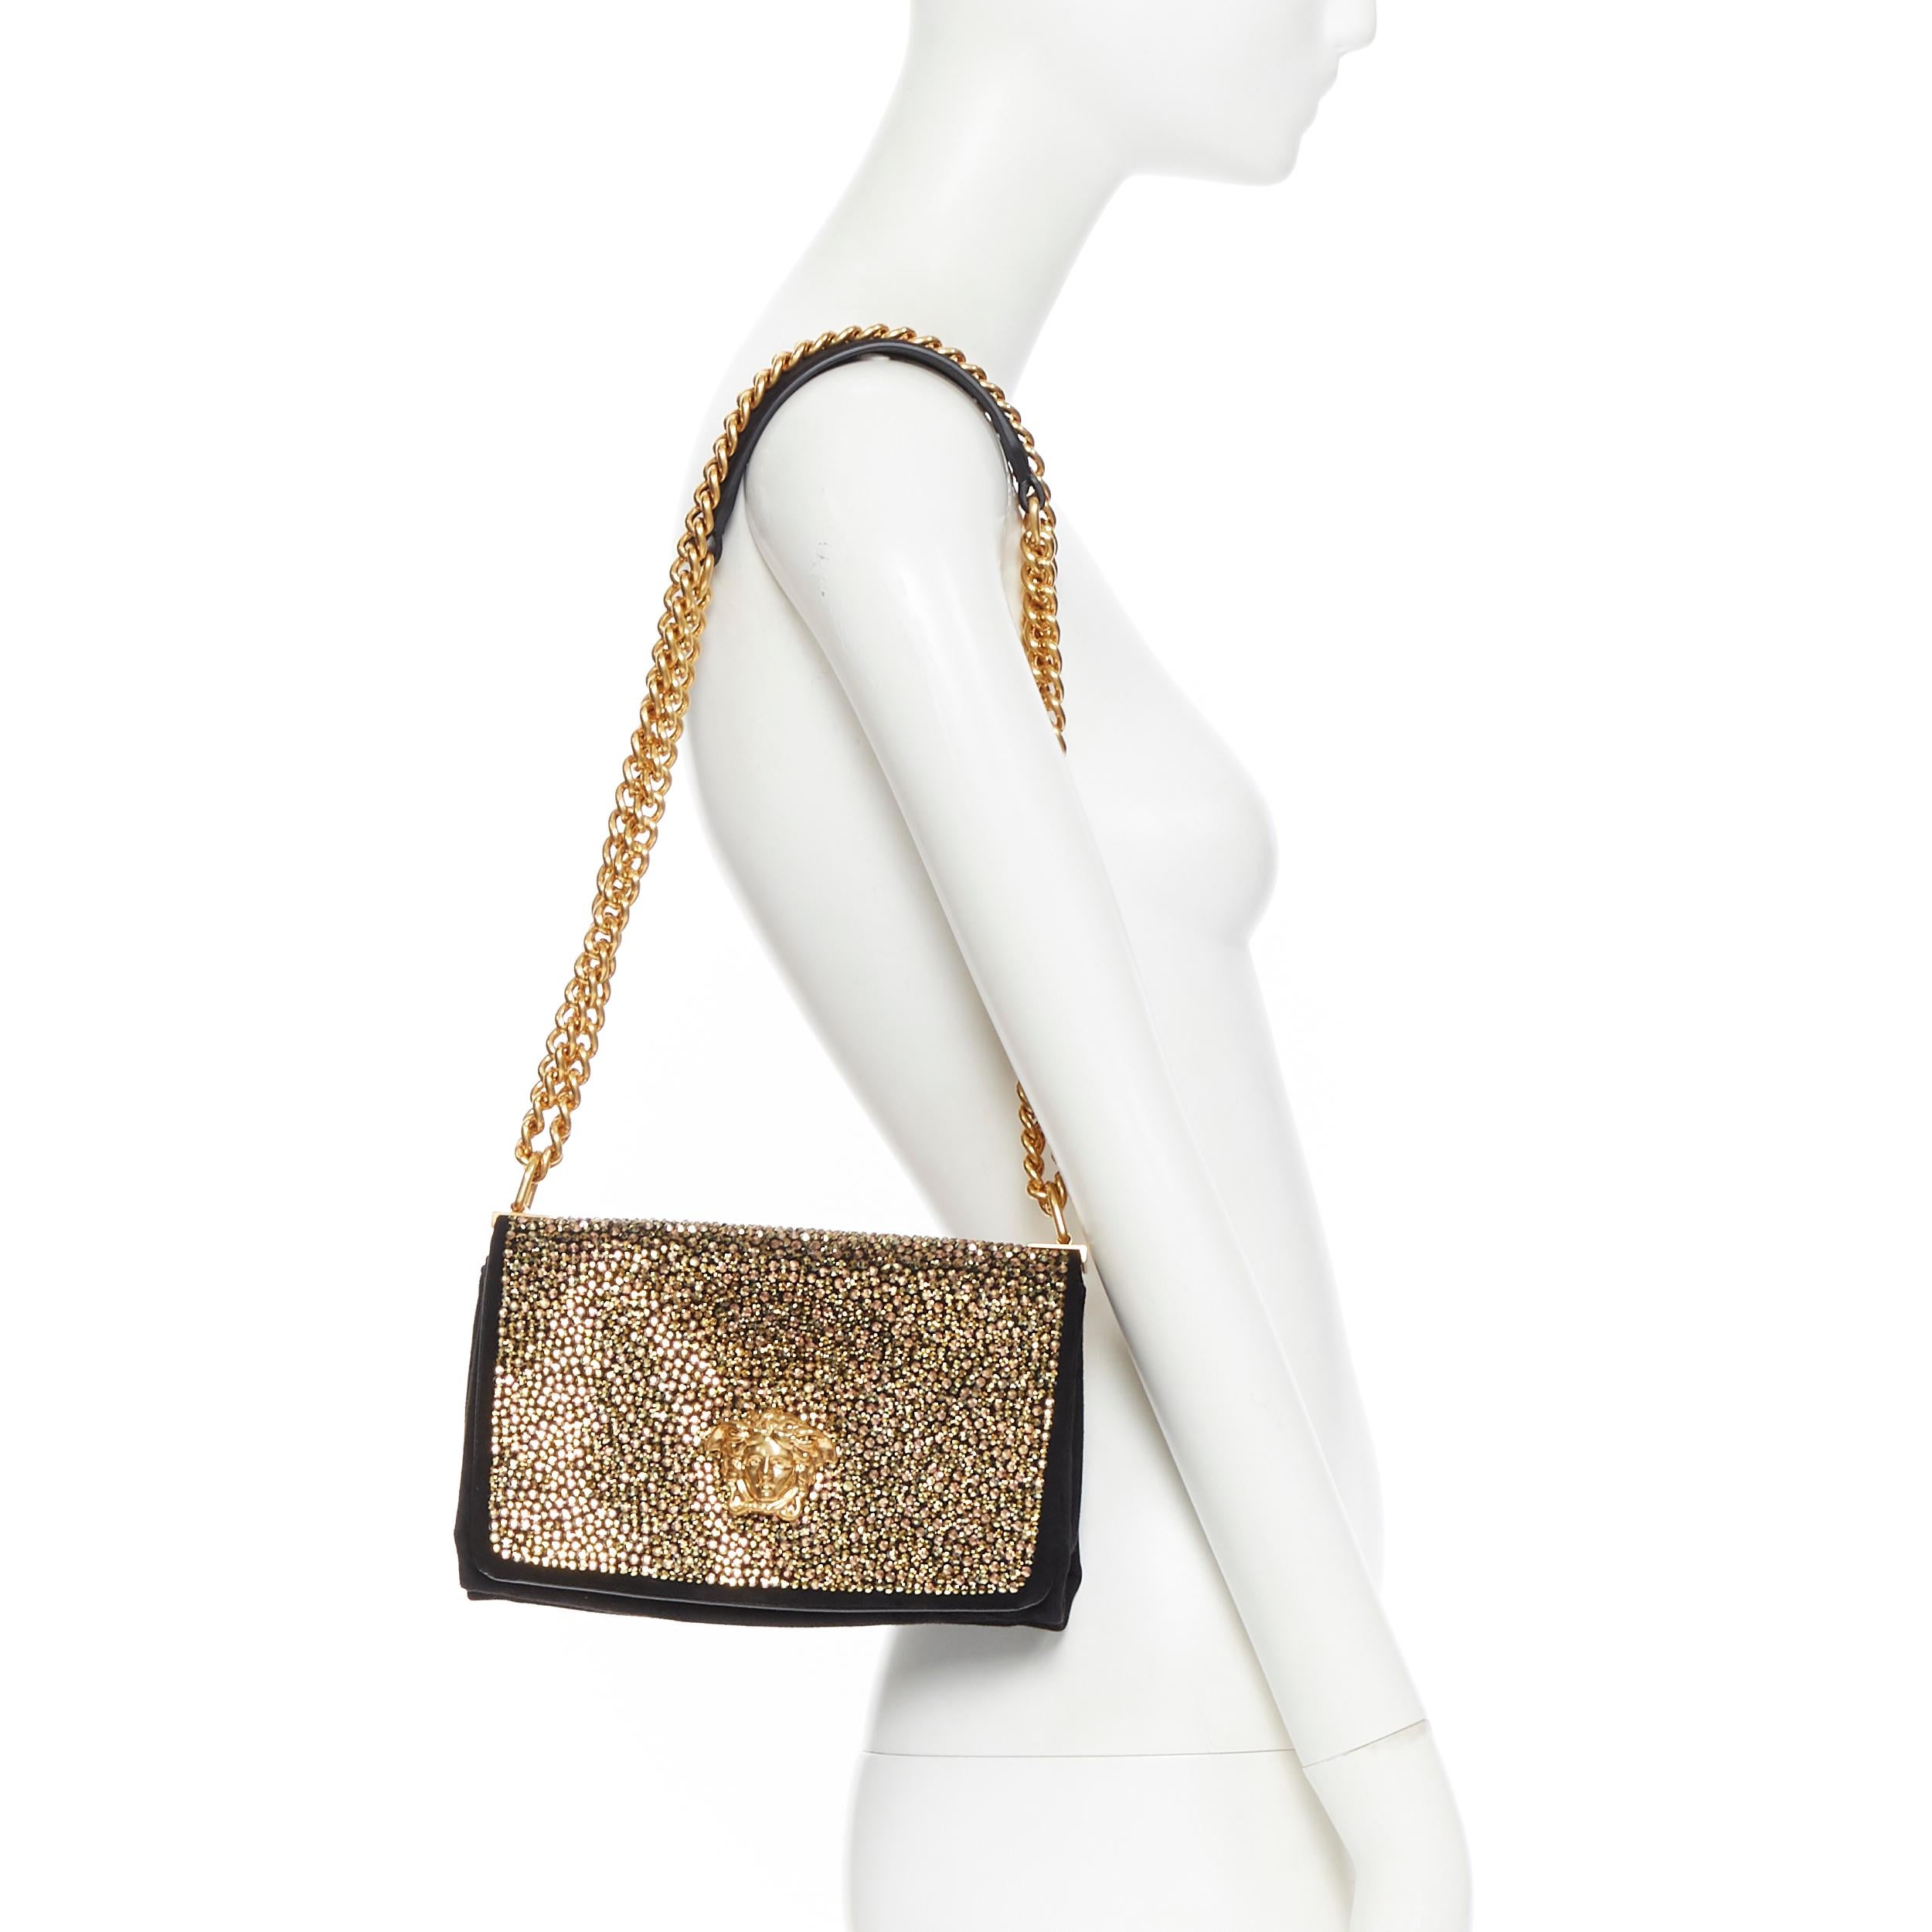 new VERSACE Palazzo Medusa gold strass crystal black suede chain shoulder bag
Brand: Versace
Designer: Donatella Versace
Collection: Fall Winter 2019
Model Name / Style: Palazzo Medusa
Material: Suede
Color: Black
Pattern: Solid
Closure: